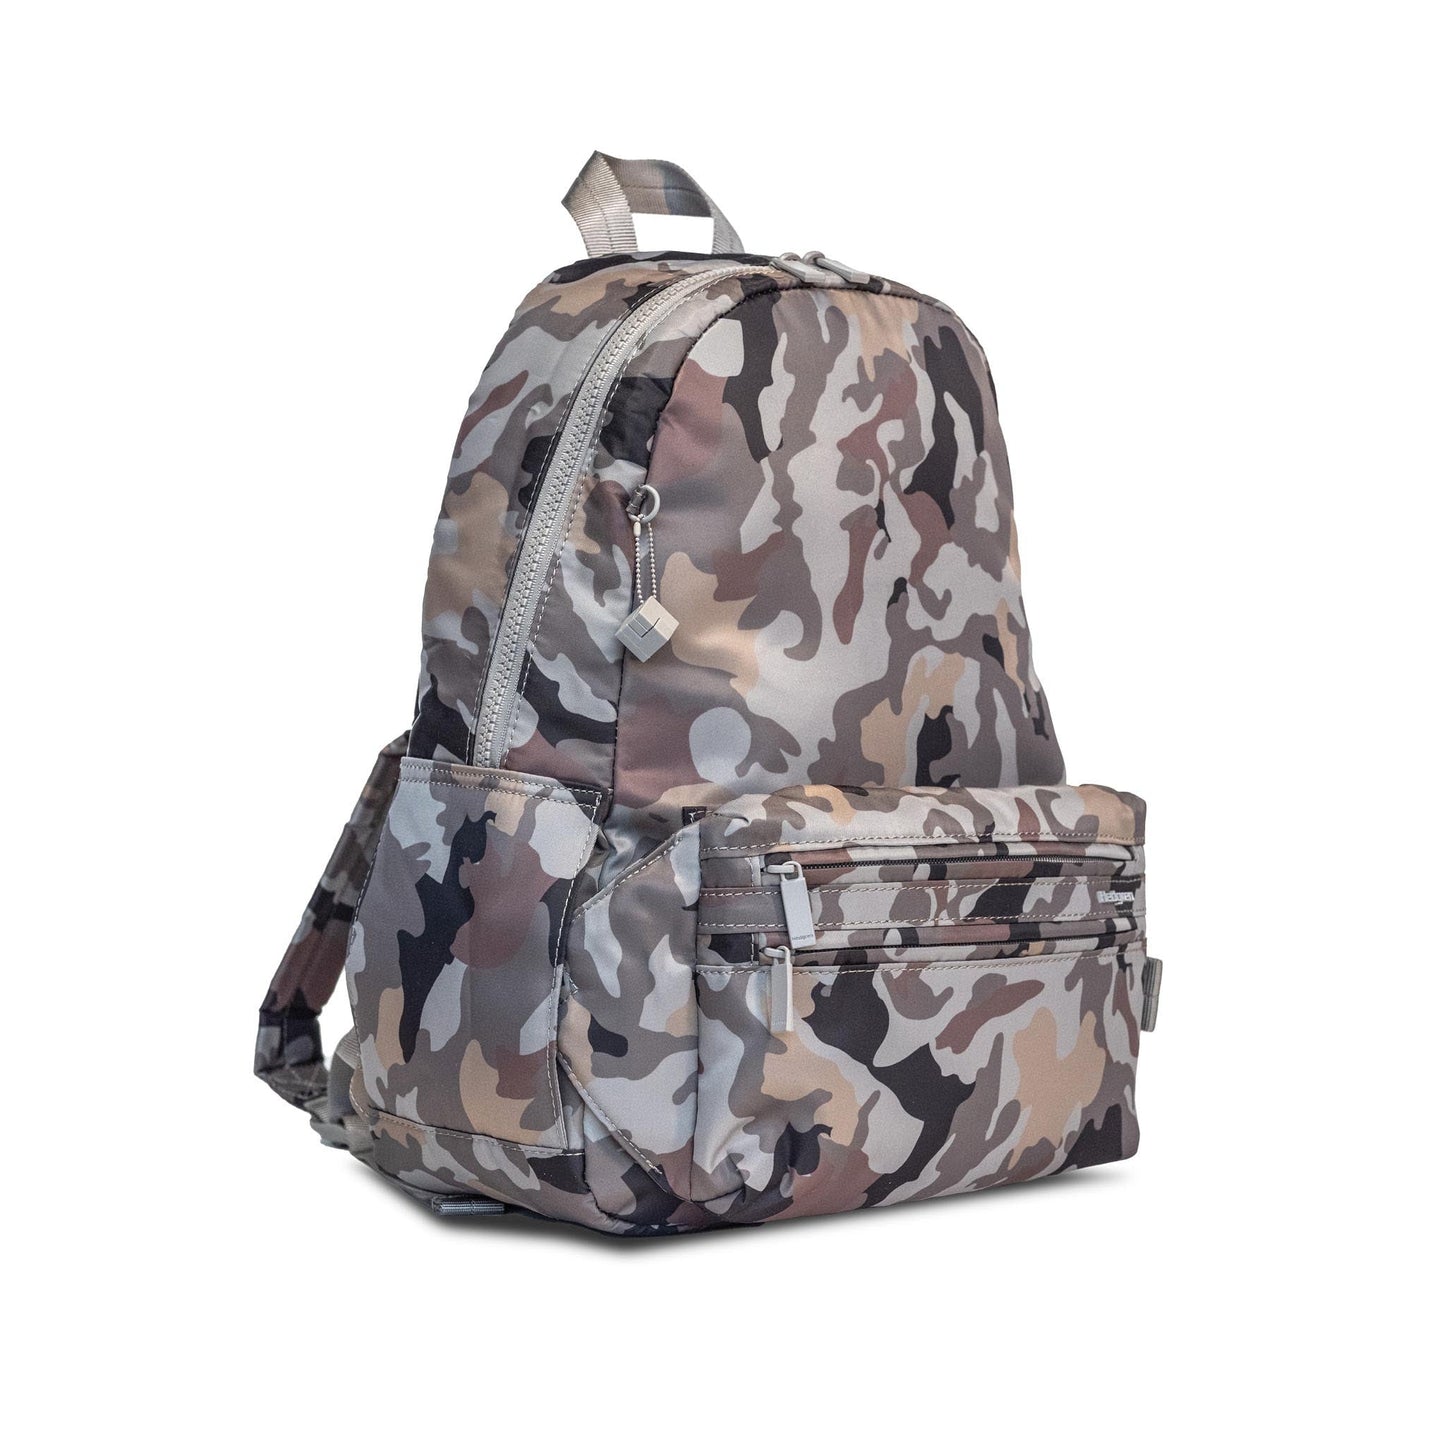 Hedgren Earth Sustainably Made Backpack with Detachable Waist Pack